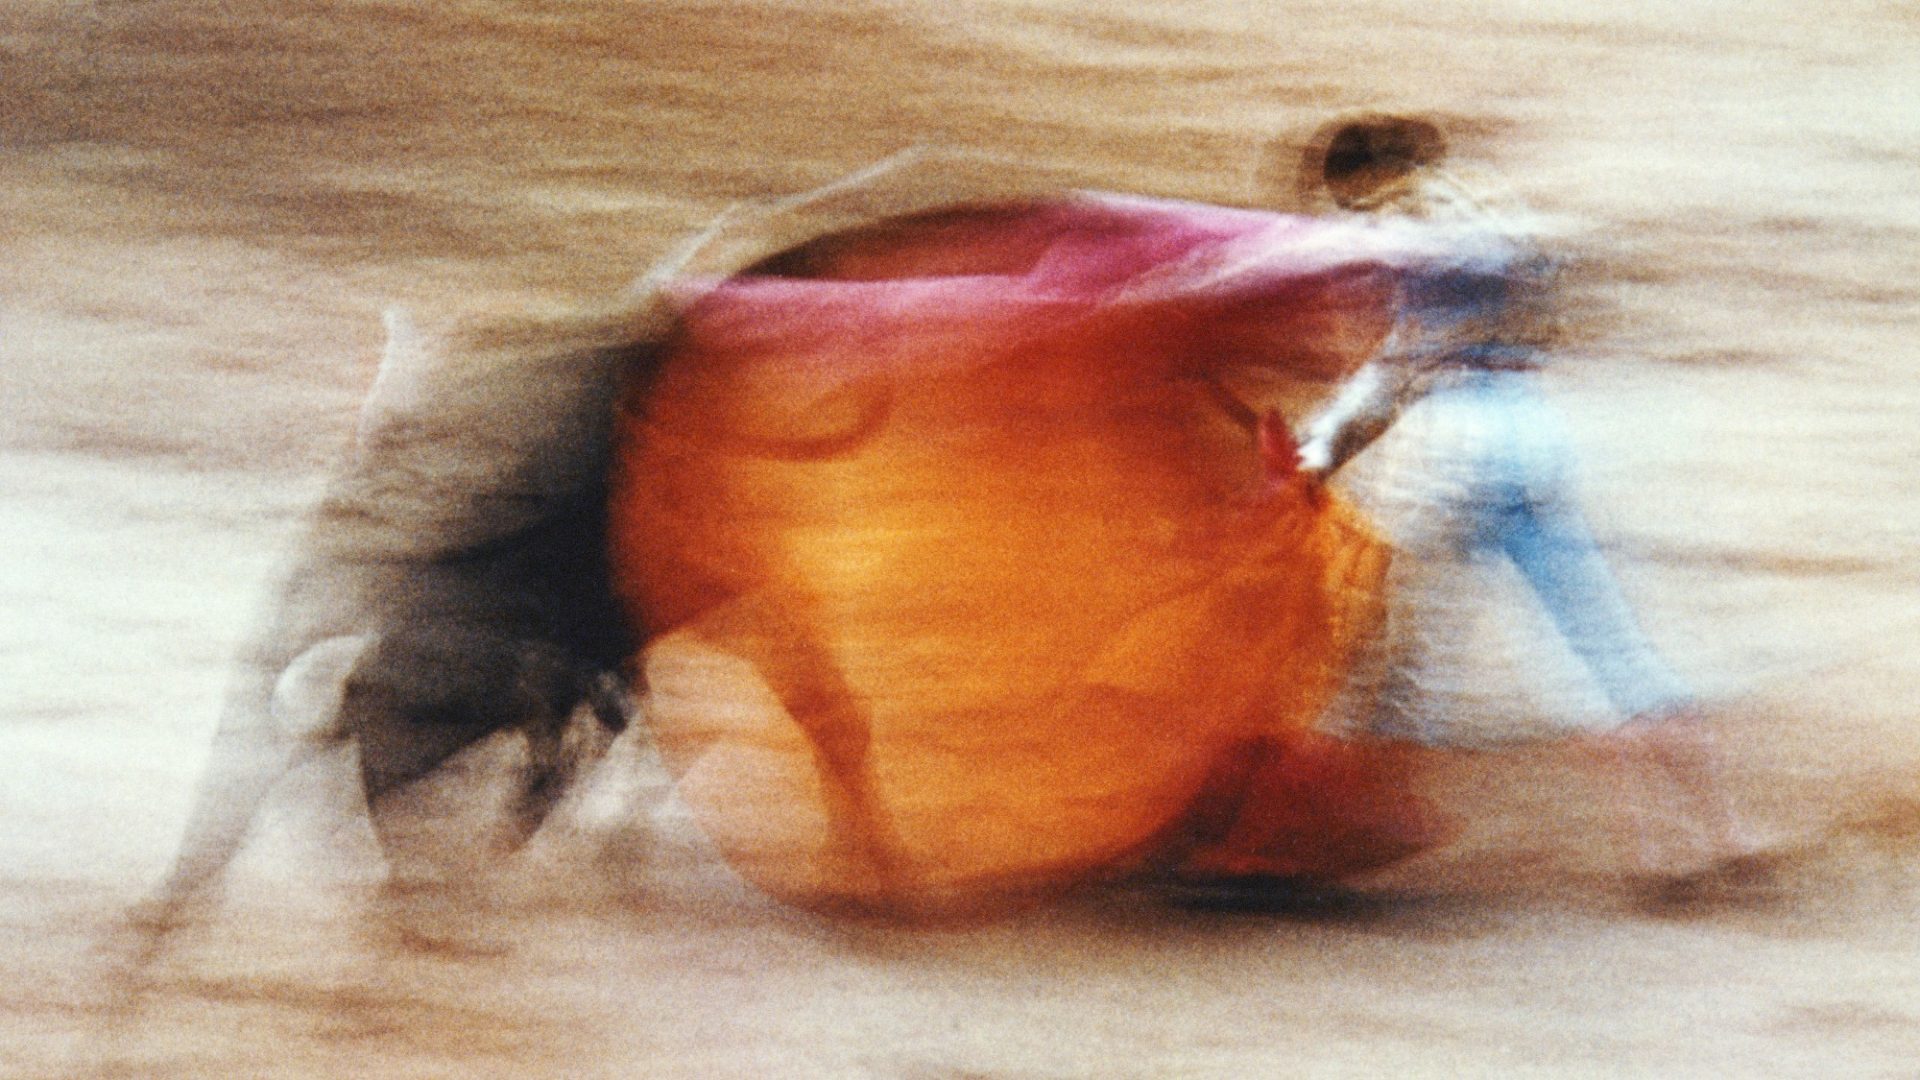 A matador twirls his red cape to confuse the bull during a Spanish bullfight, c1960. All photos on this page: Ernst Haas/Getty